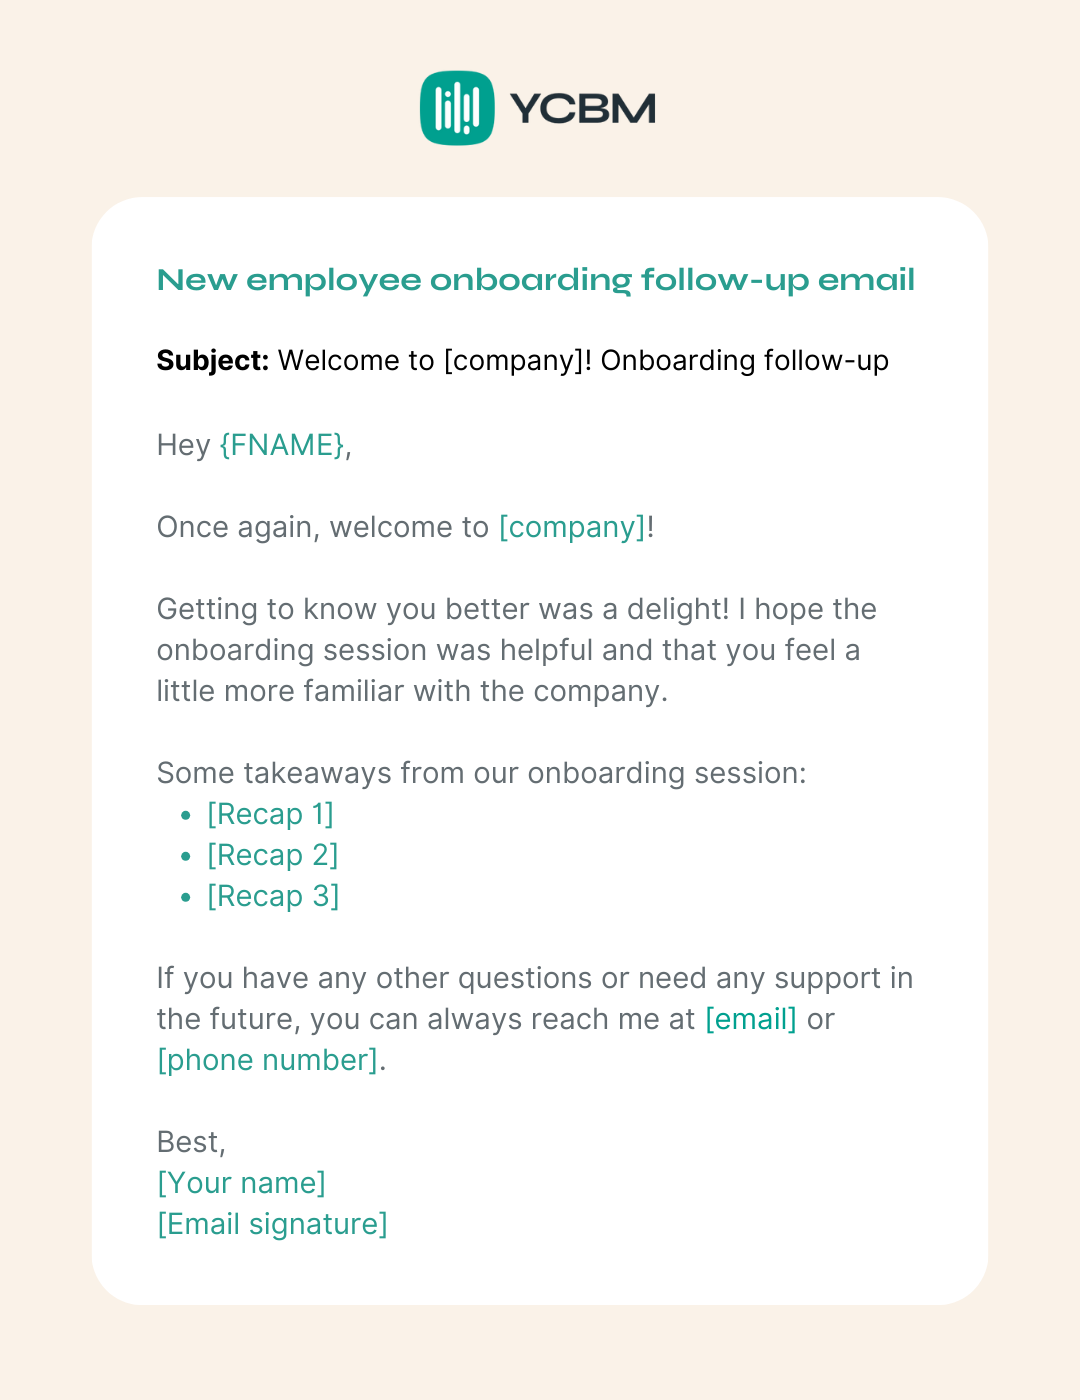 new employee onboarding follow-up email